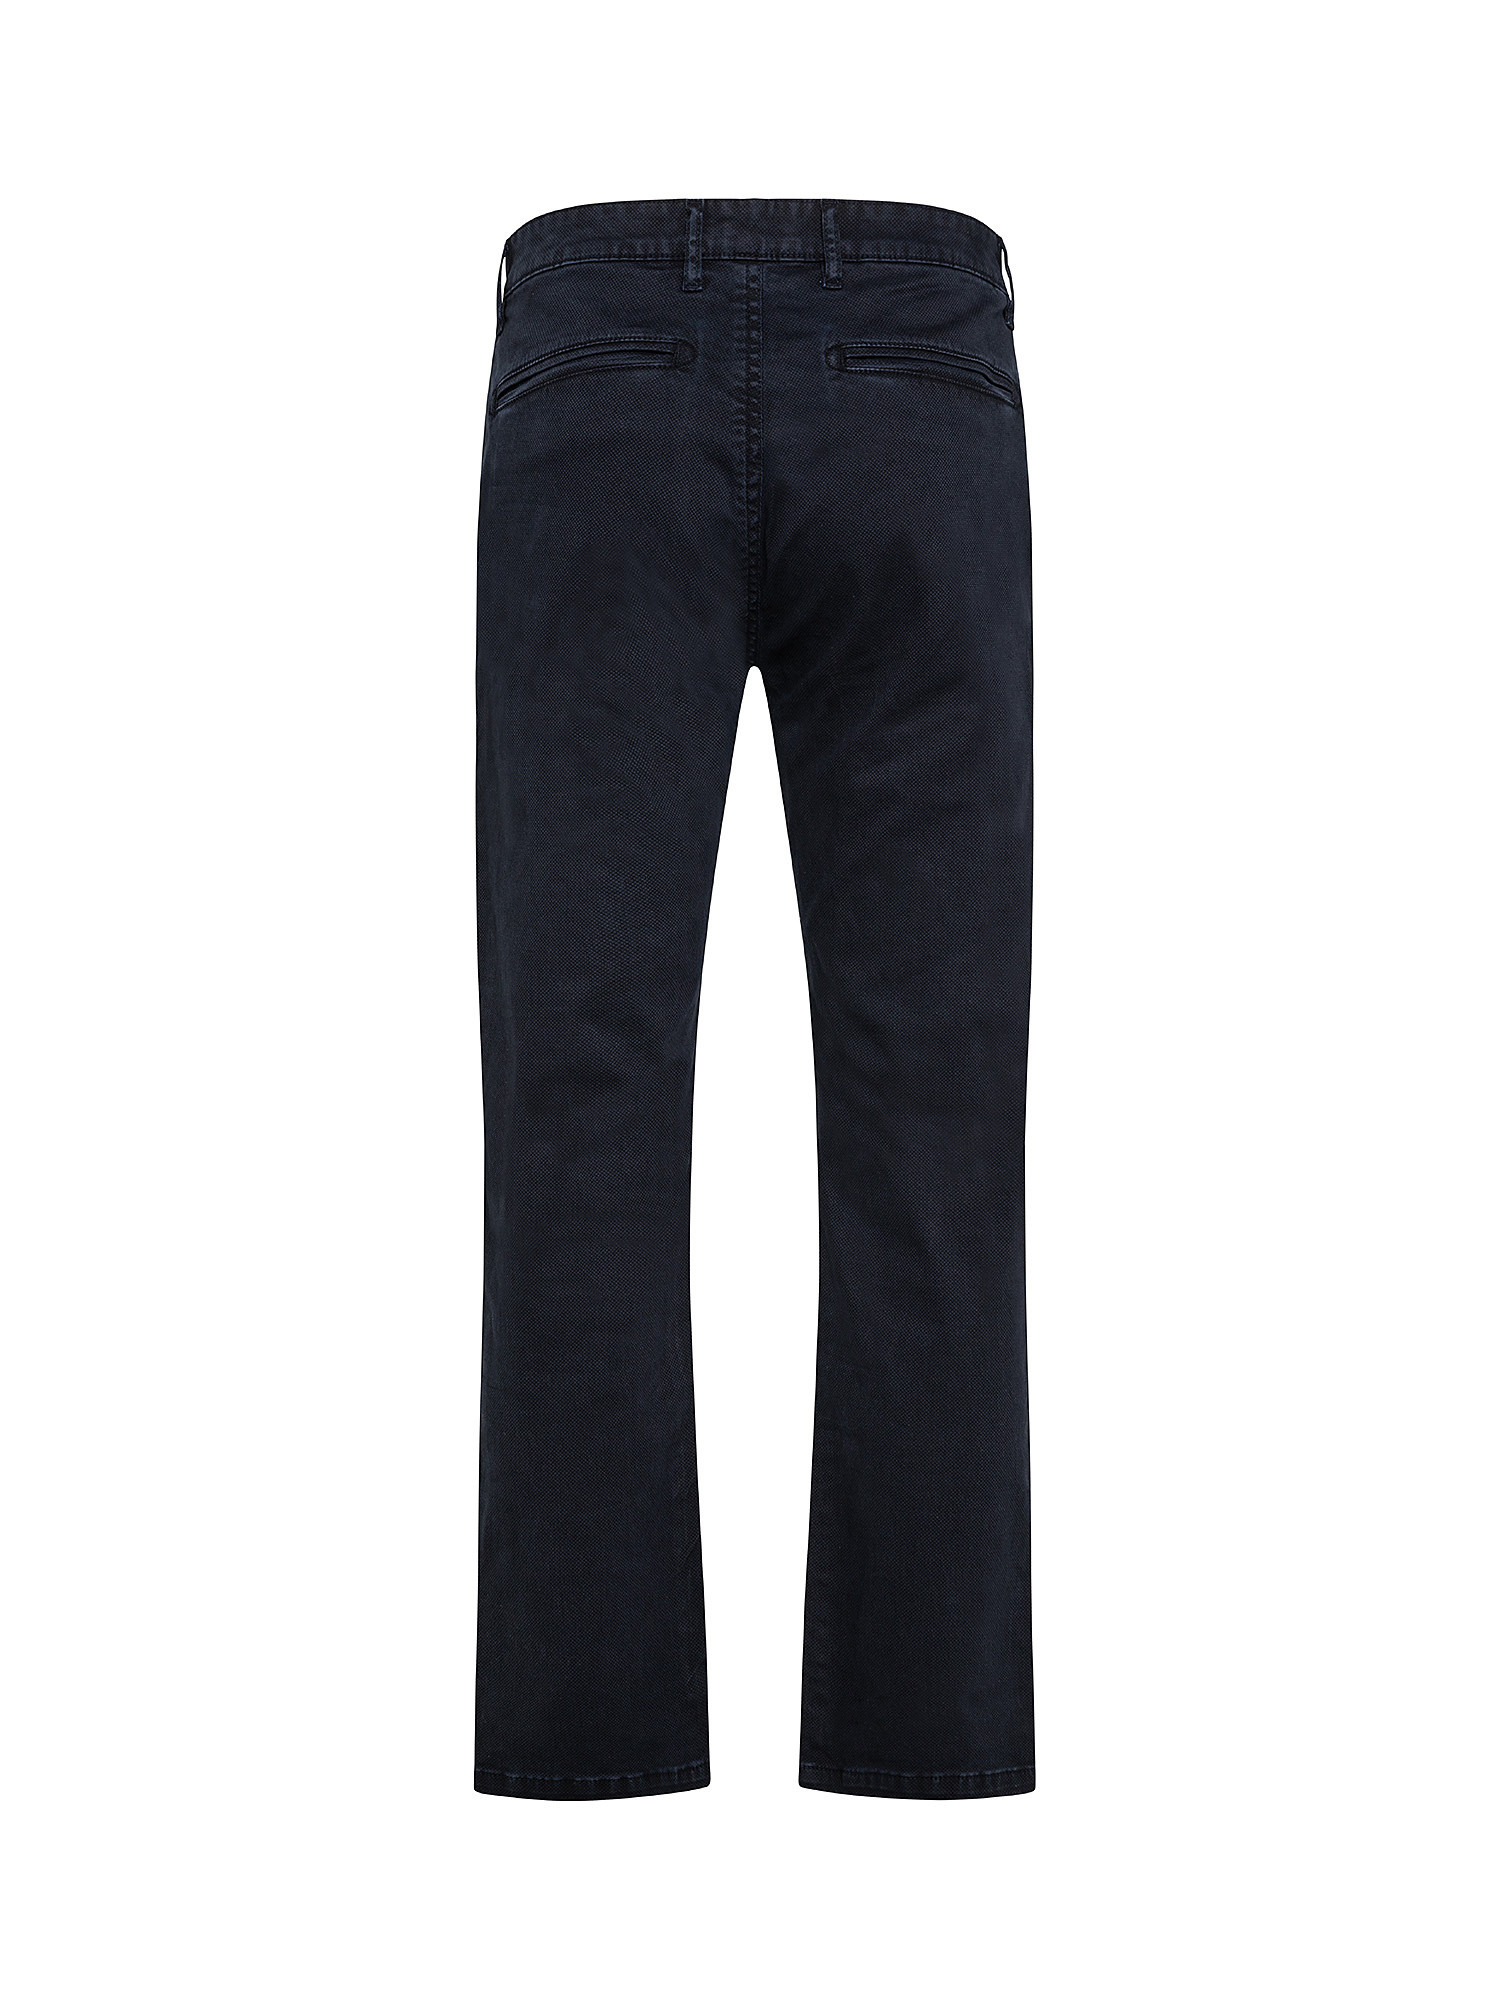 Stretch cotton chinos trousers, Dark Blue, large image number 1